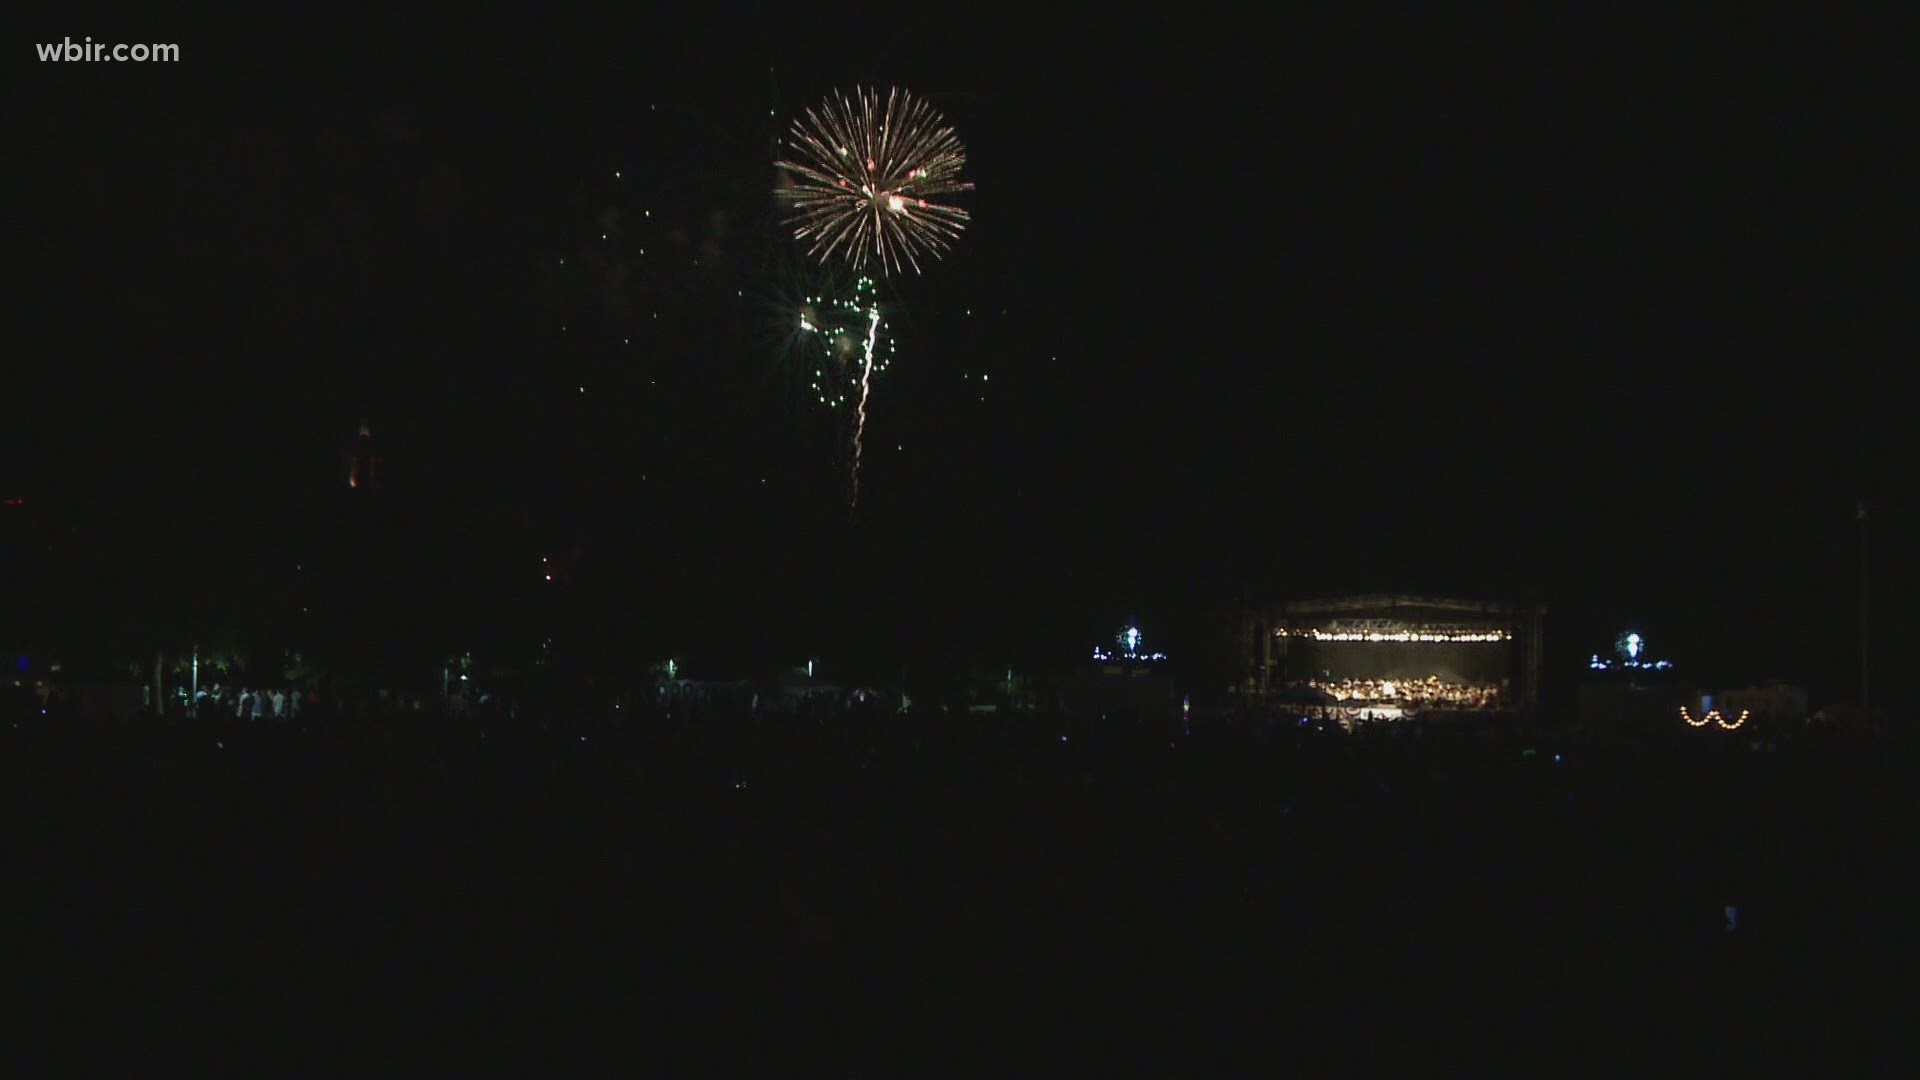 As the pandemic ends, many people are looking forward to big Fourth of July celebrations.